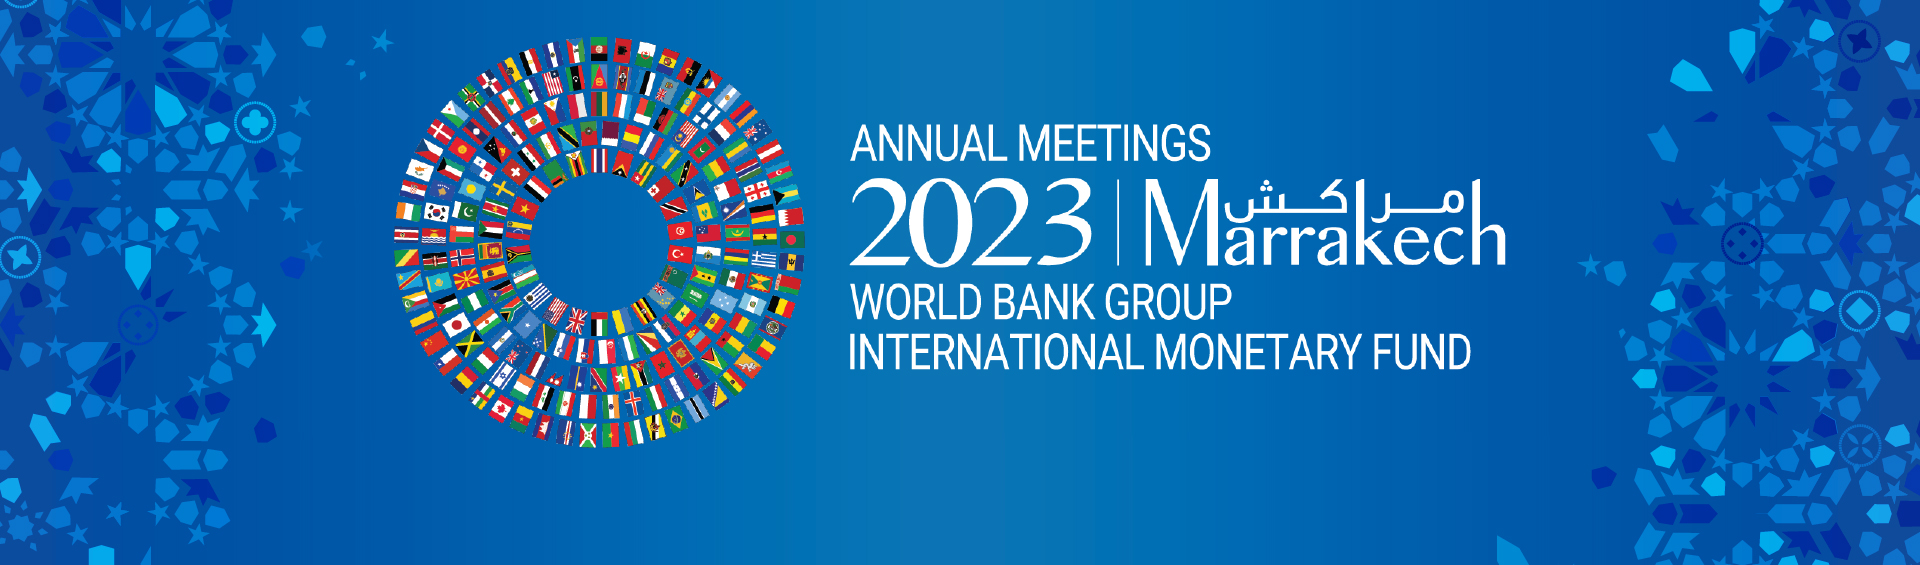 World Bank and IMF to hold Annual Meetings in Marrakech